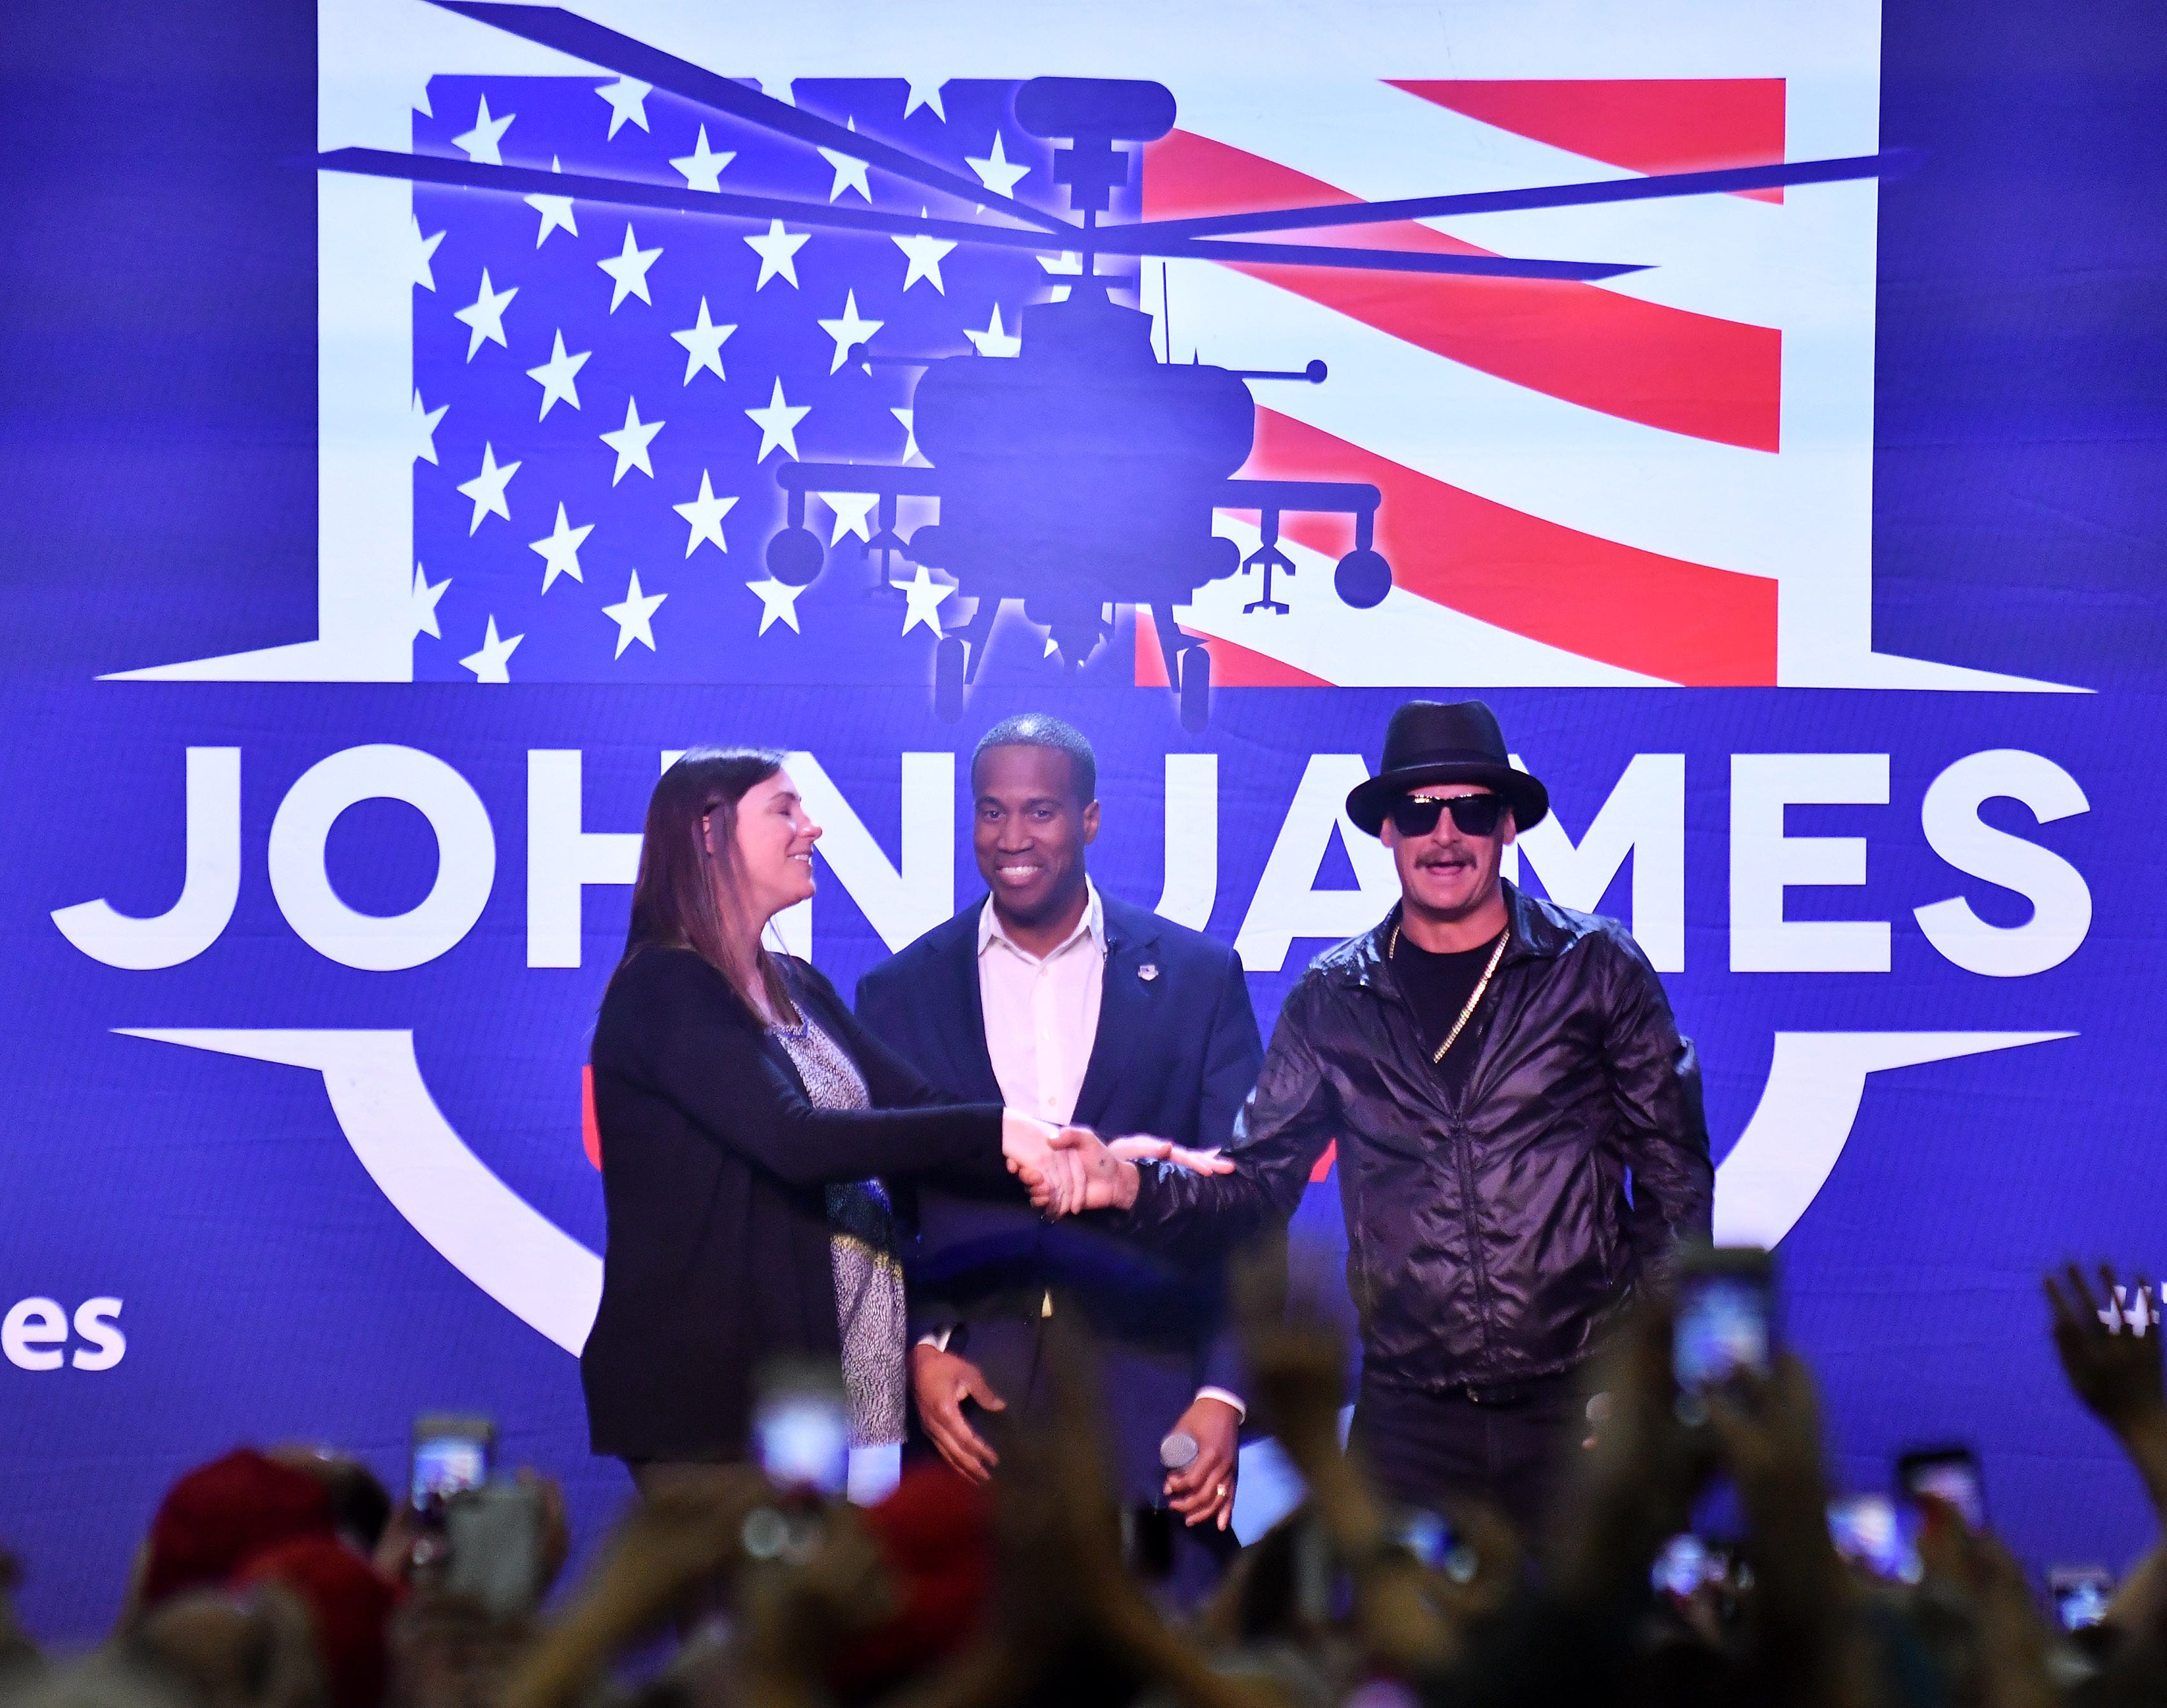 Kid Rock introduces John James and his wife Elizabeth, left, during the rally.